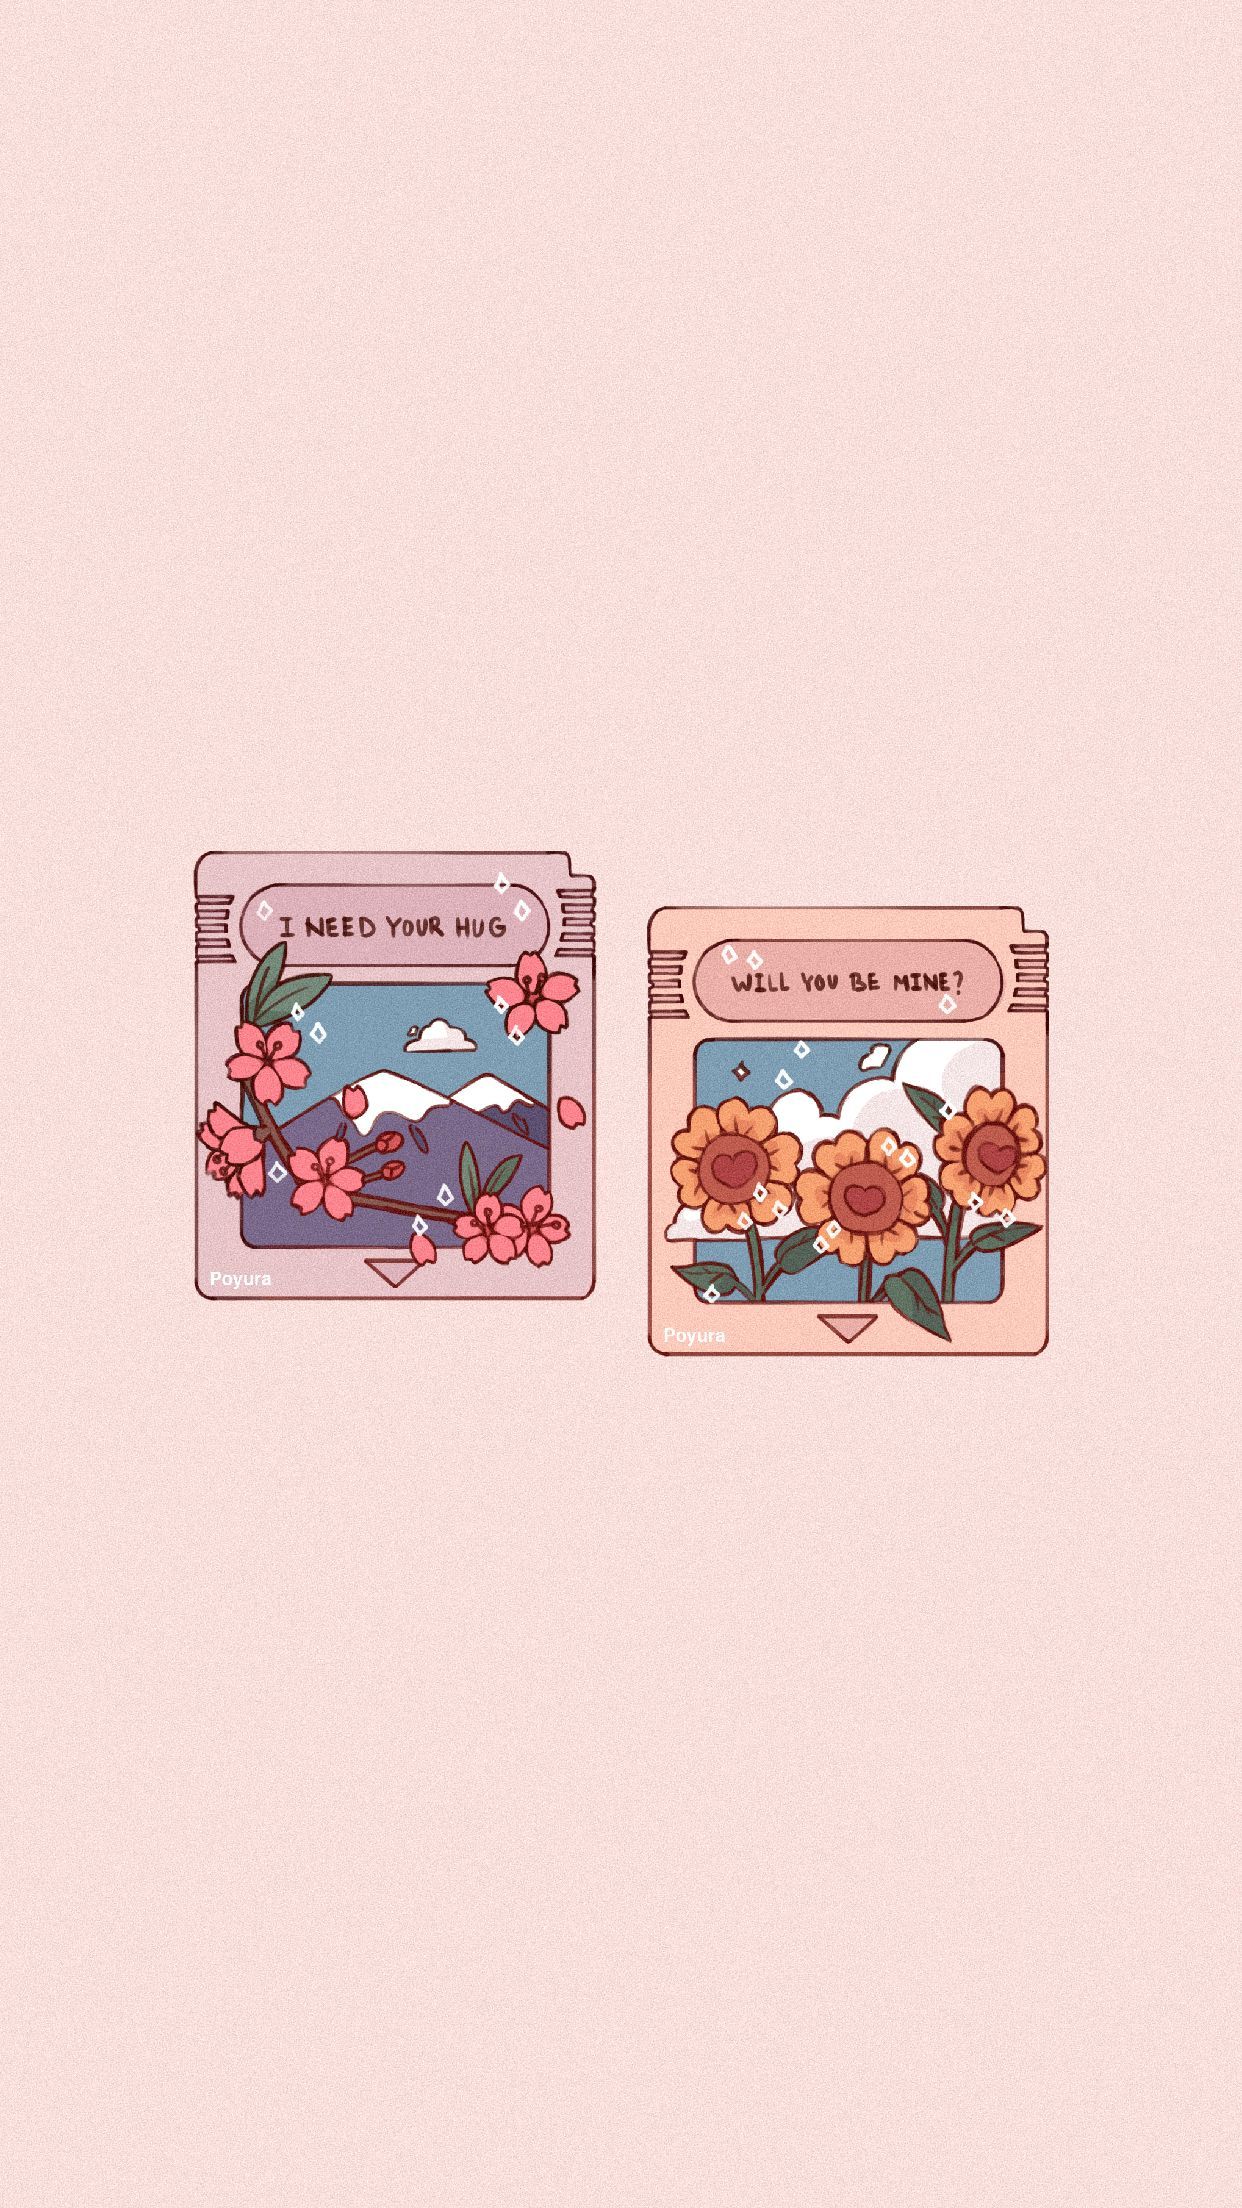 Two stickers with flowers and a sunset - Super Mario, kawaii